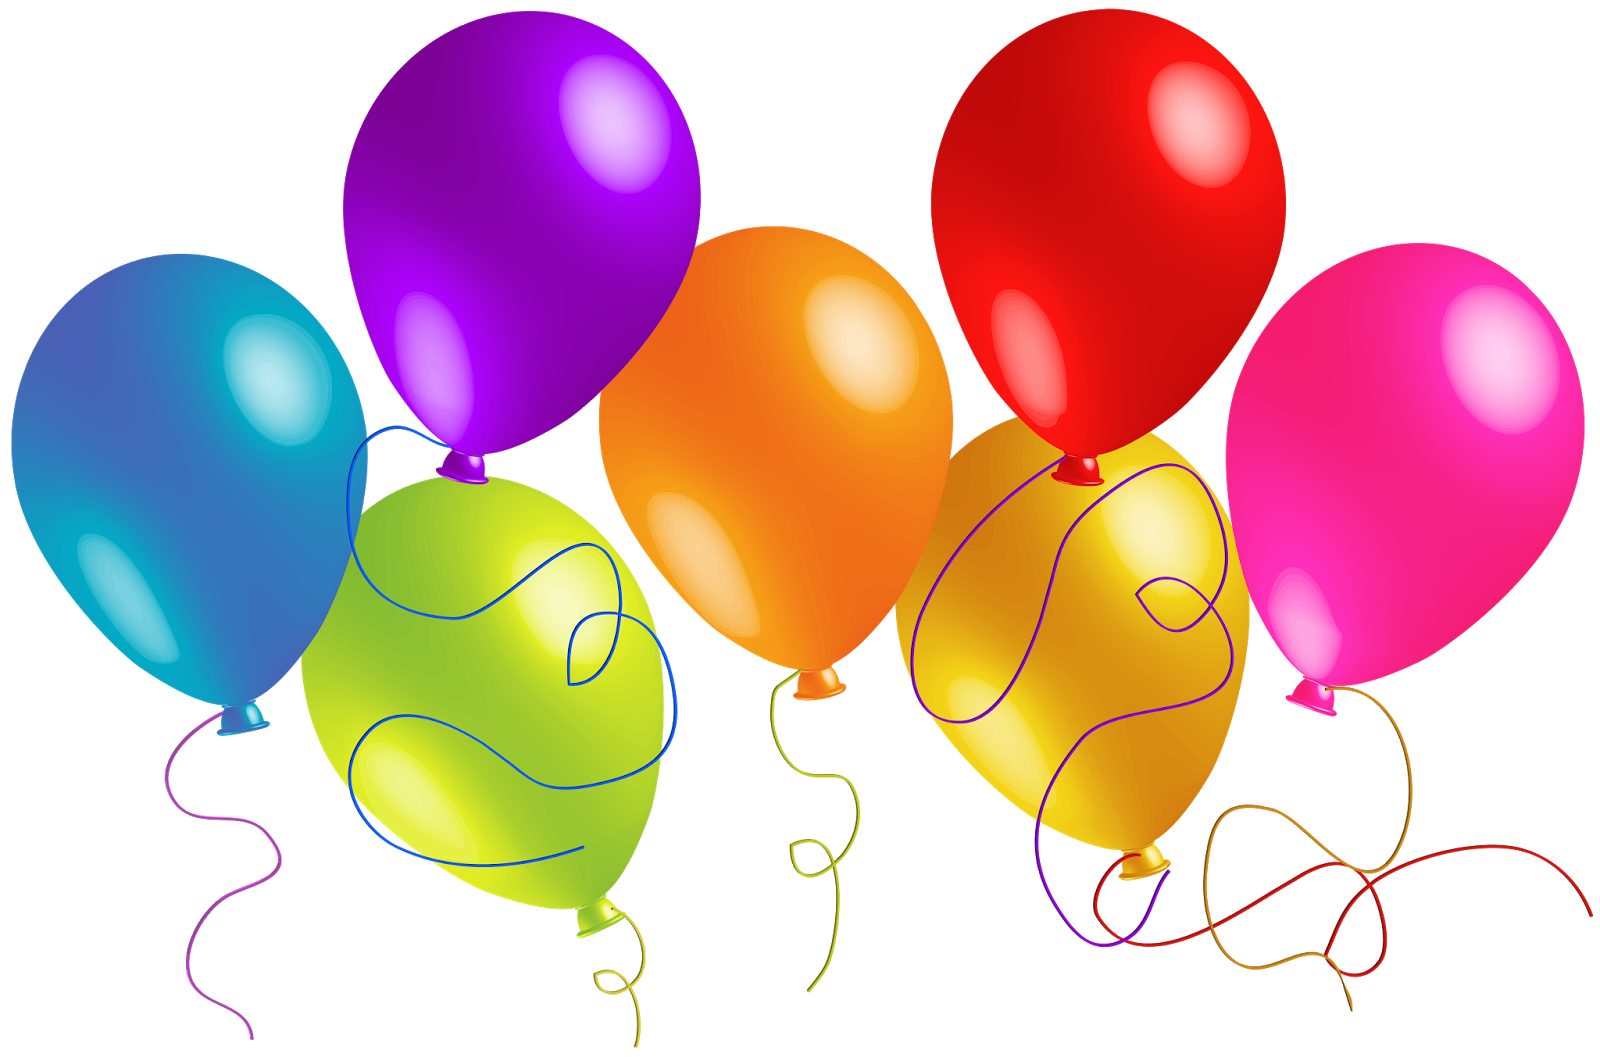 Garland clipart balloon. Anniversary free large images